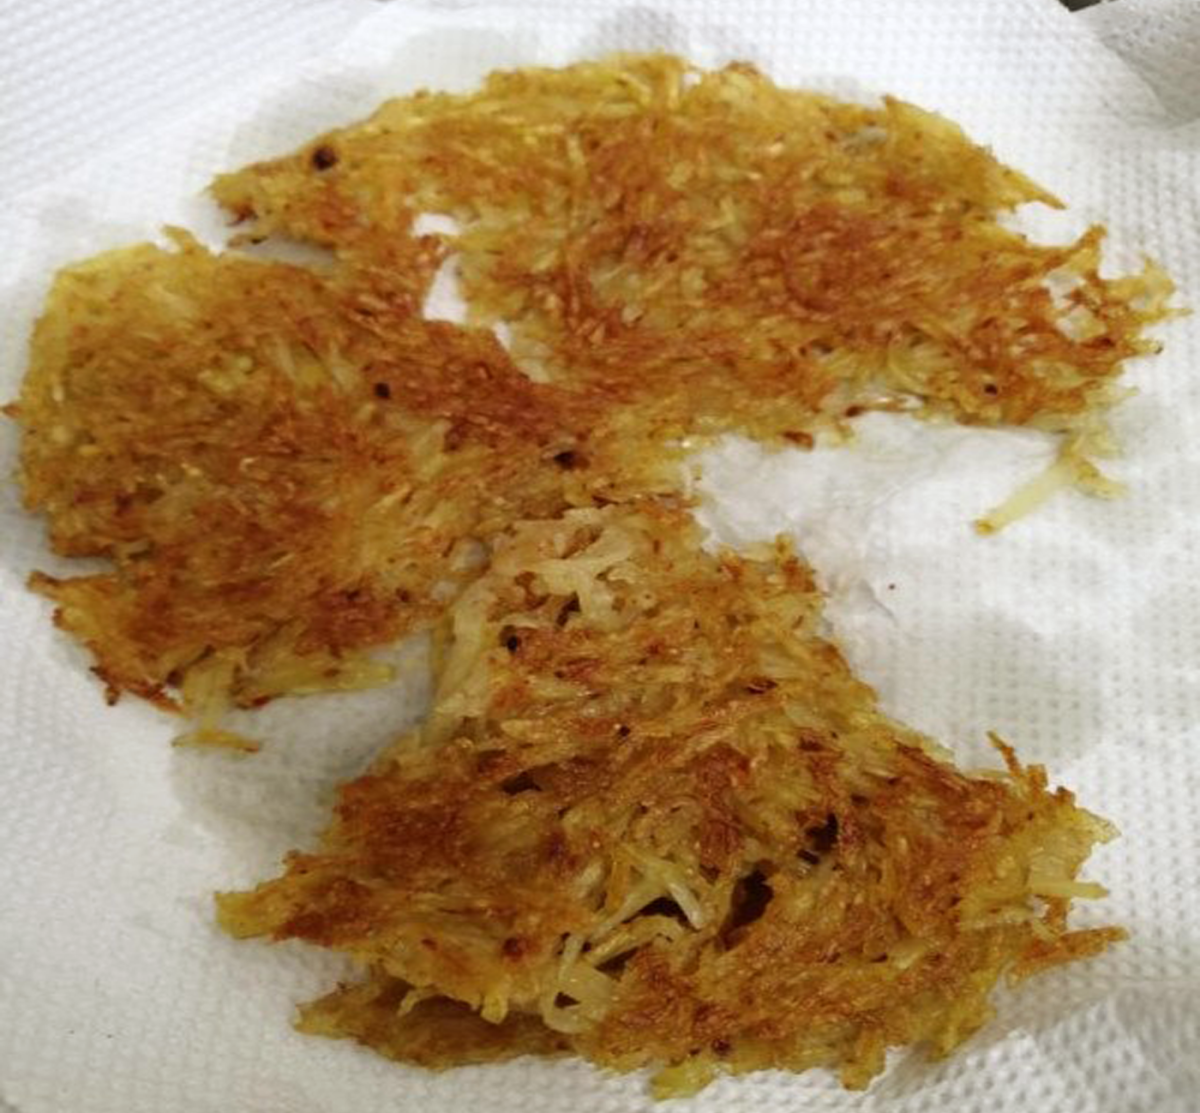 Cut the hash brown into mini triangles for easy snacking